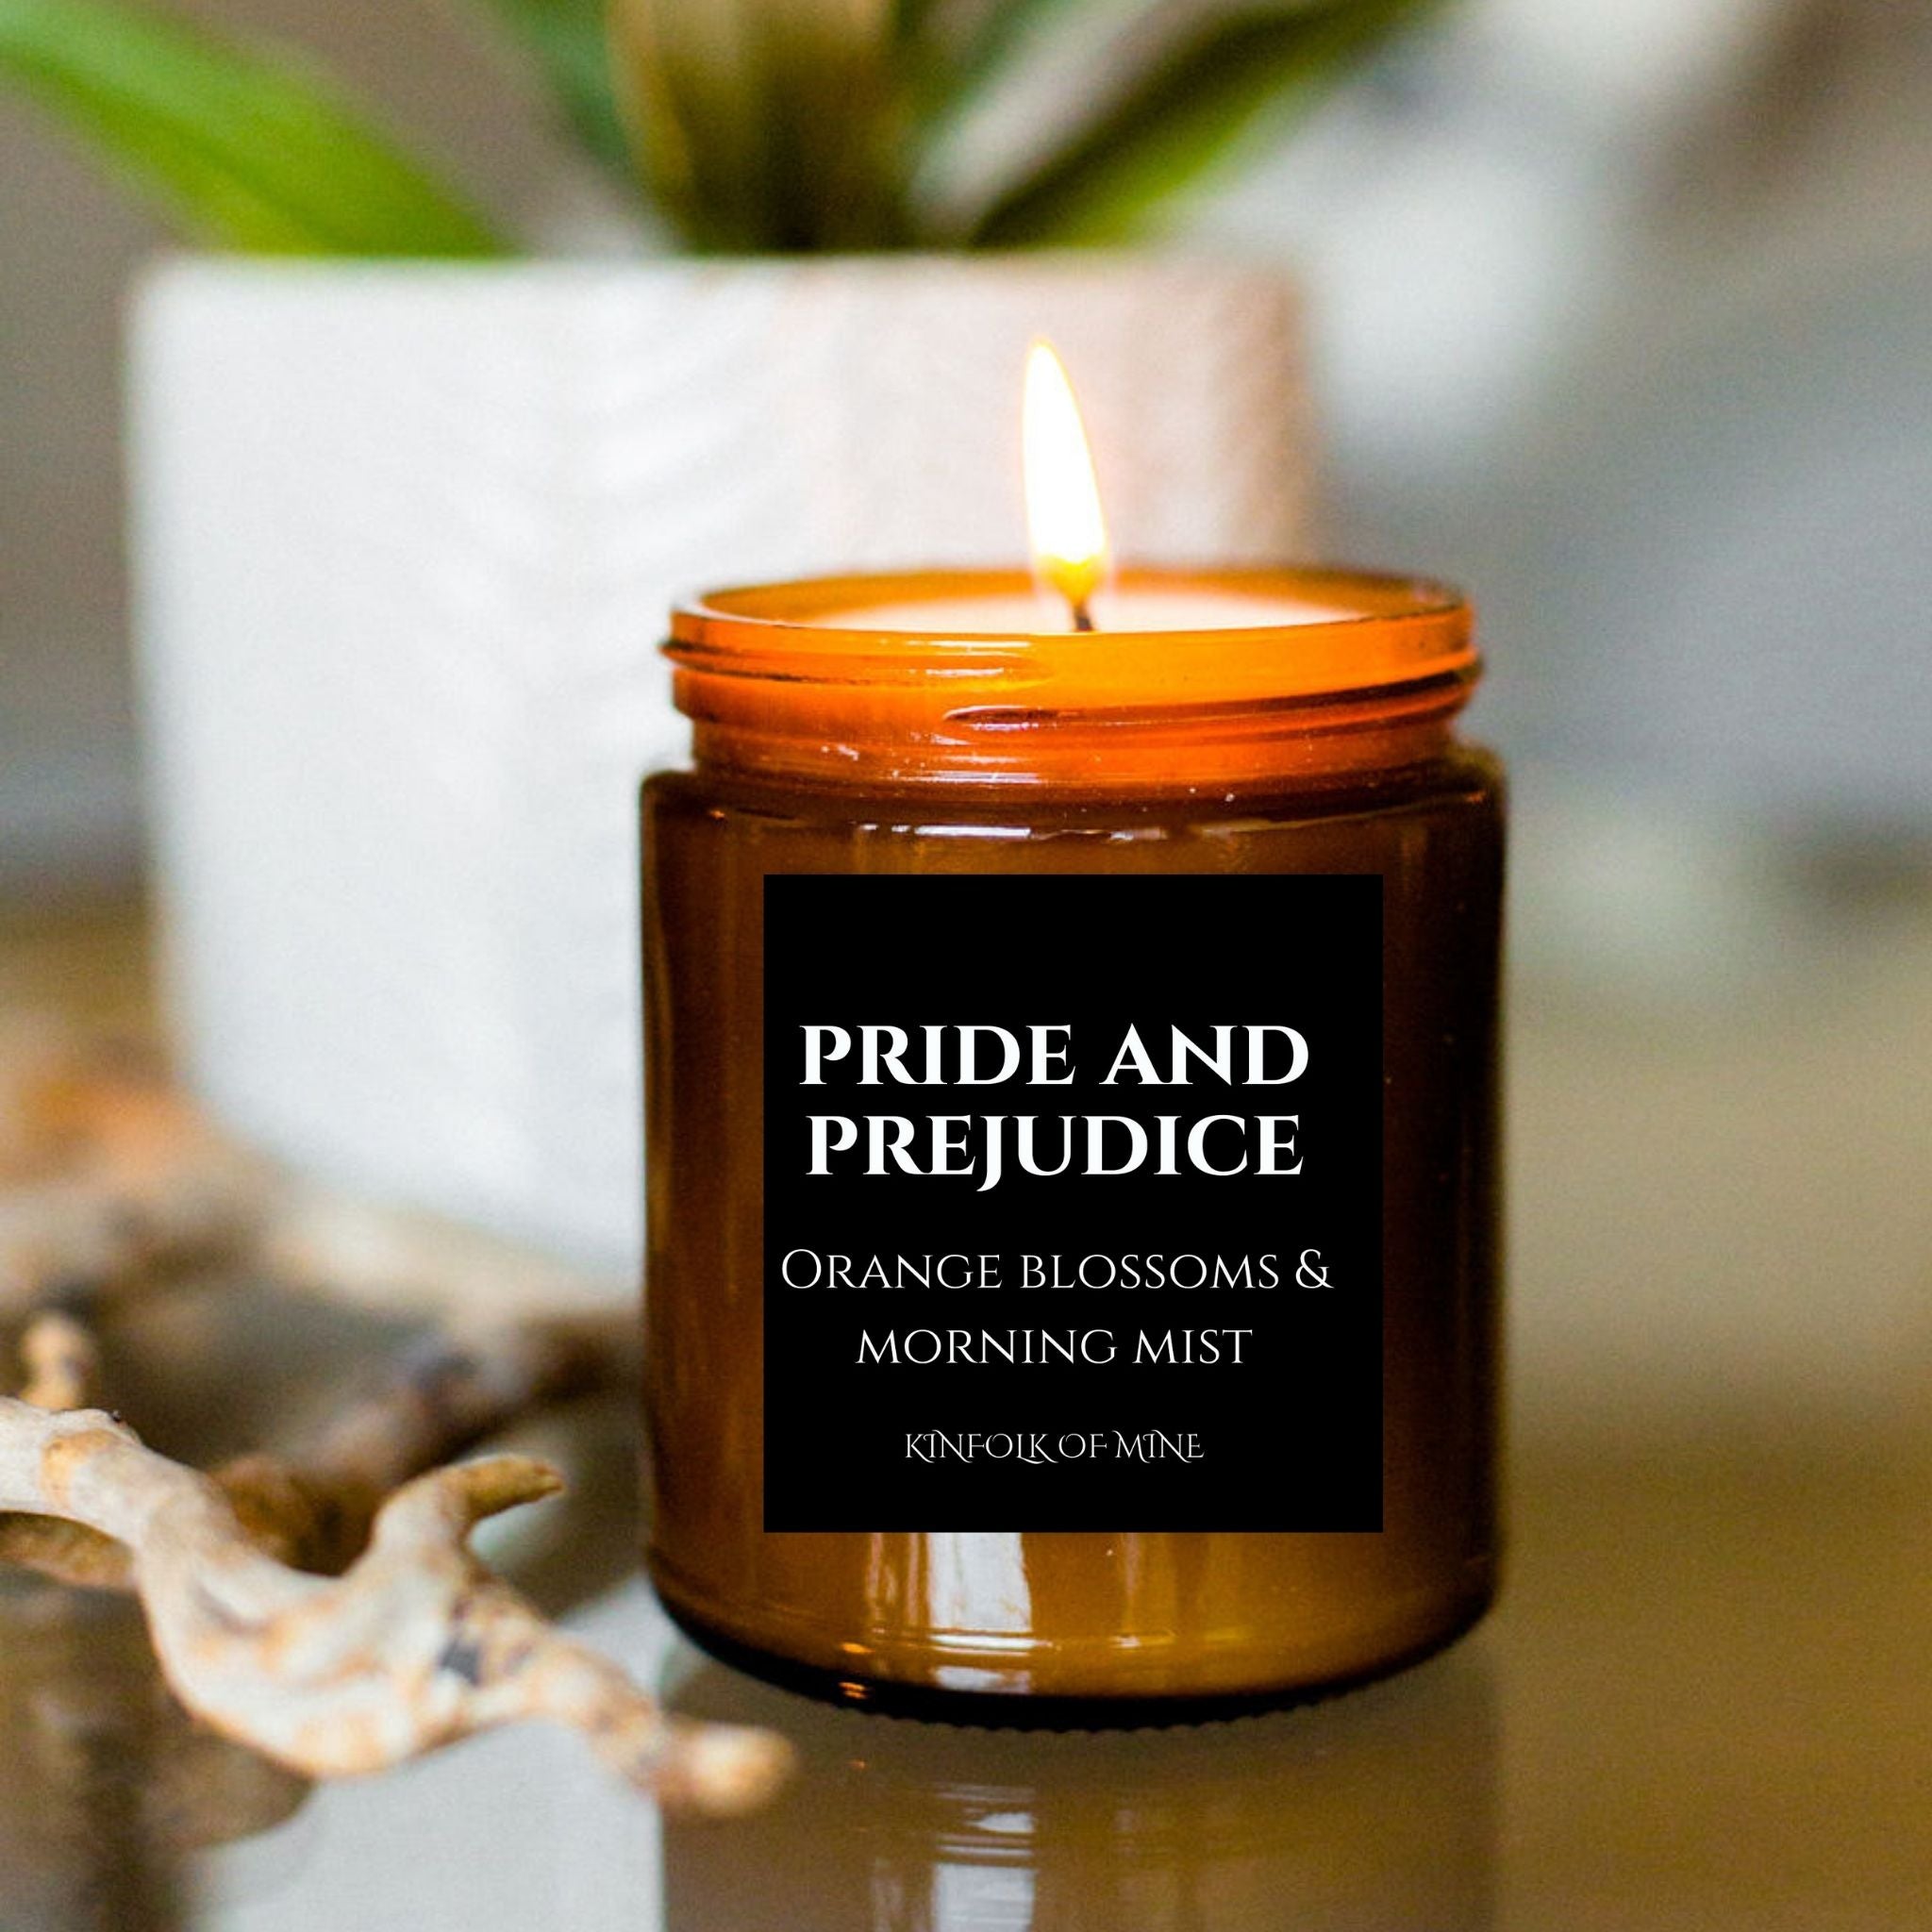 LALLYBROCH Book Lovers Candle